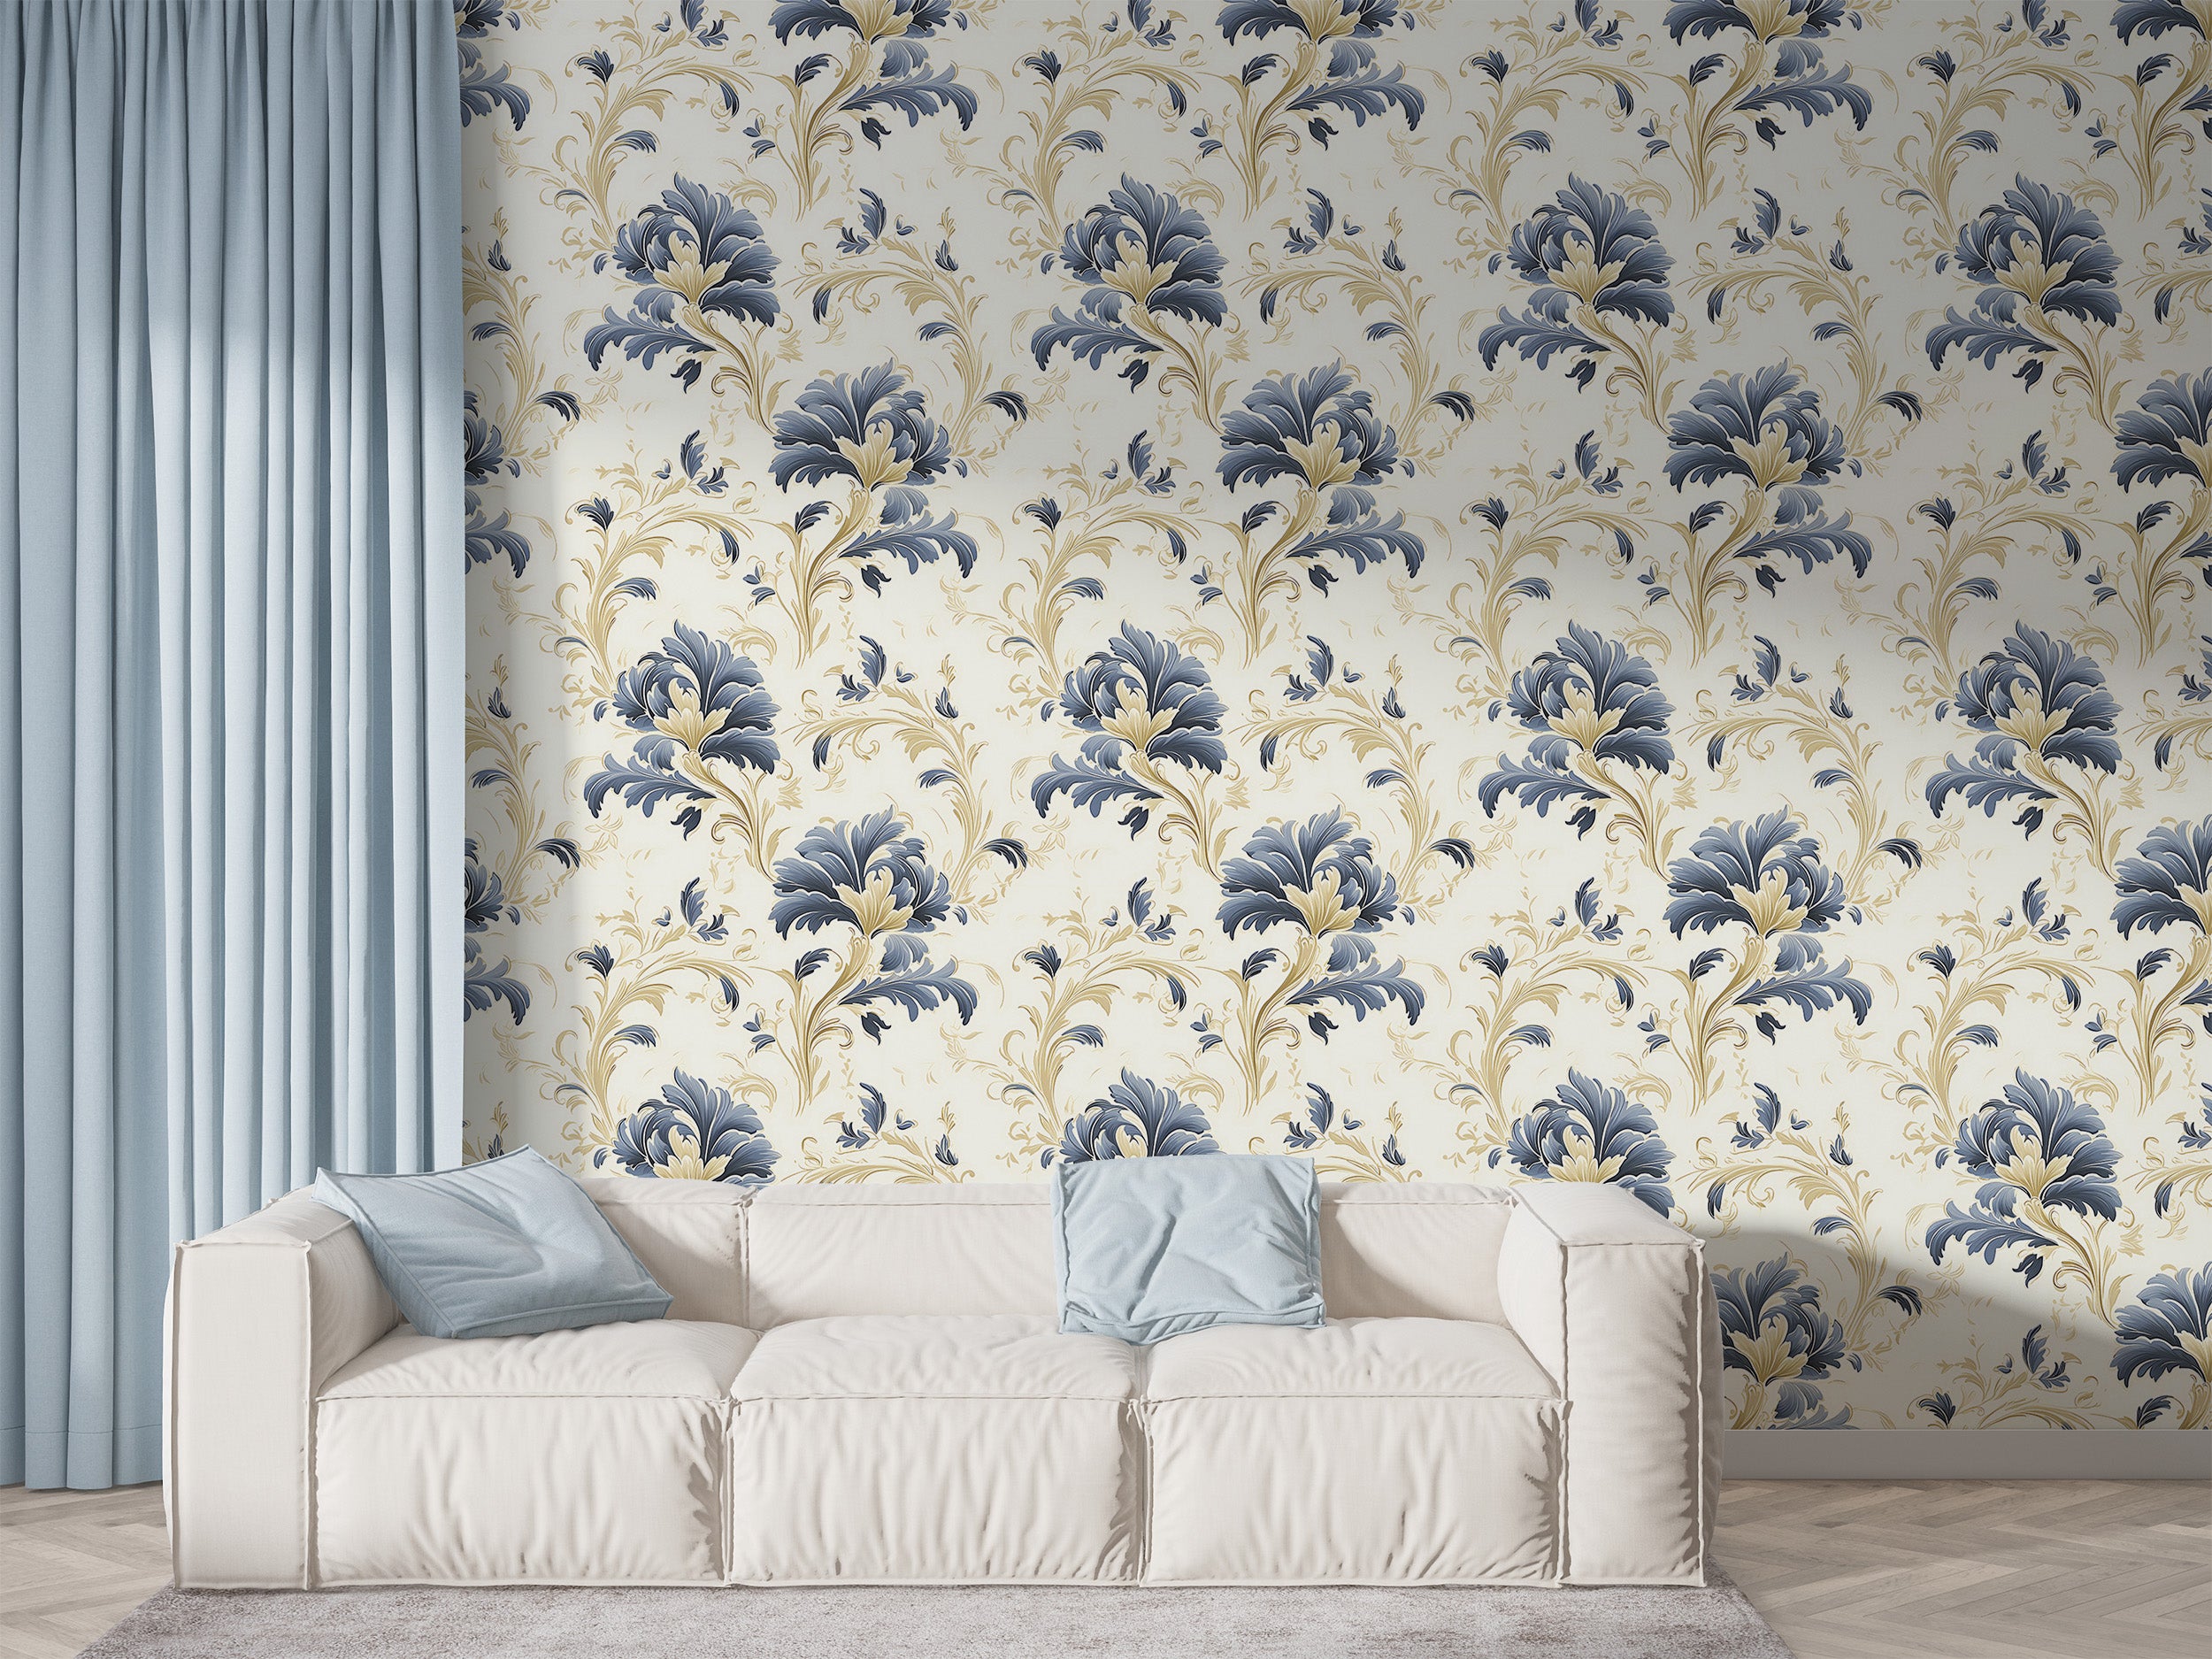 Enhance Decor with Beige and Blue Floral Wall Decal